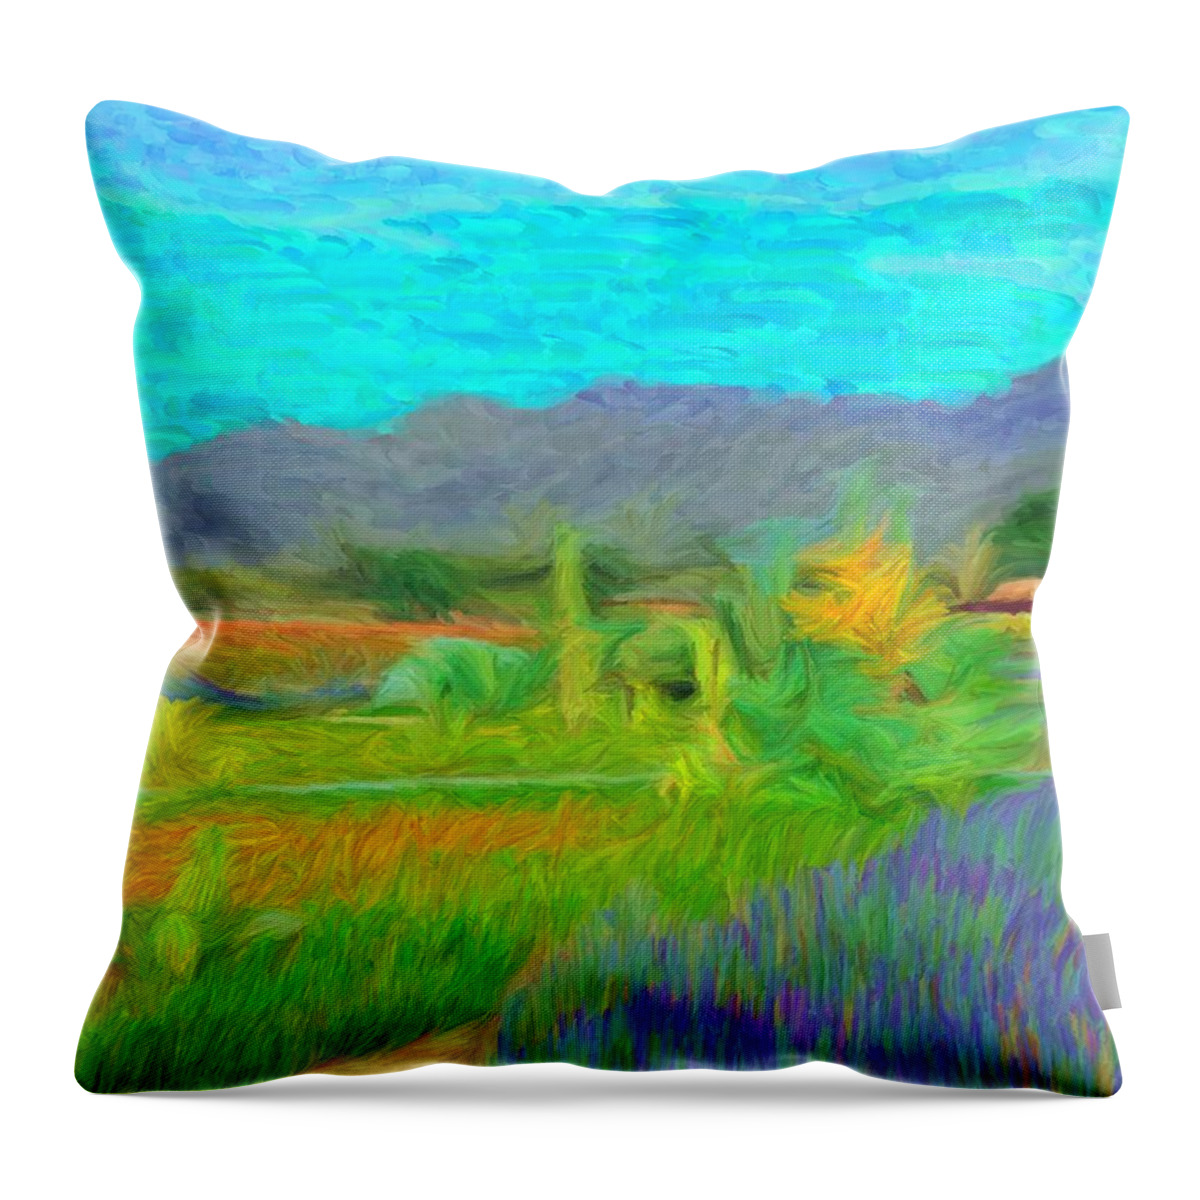 Argentina Throw Pillow featuring the digital art Argentina 1 - by Caito Junqueira